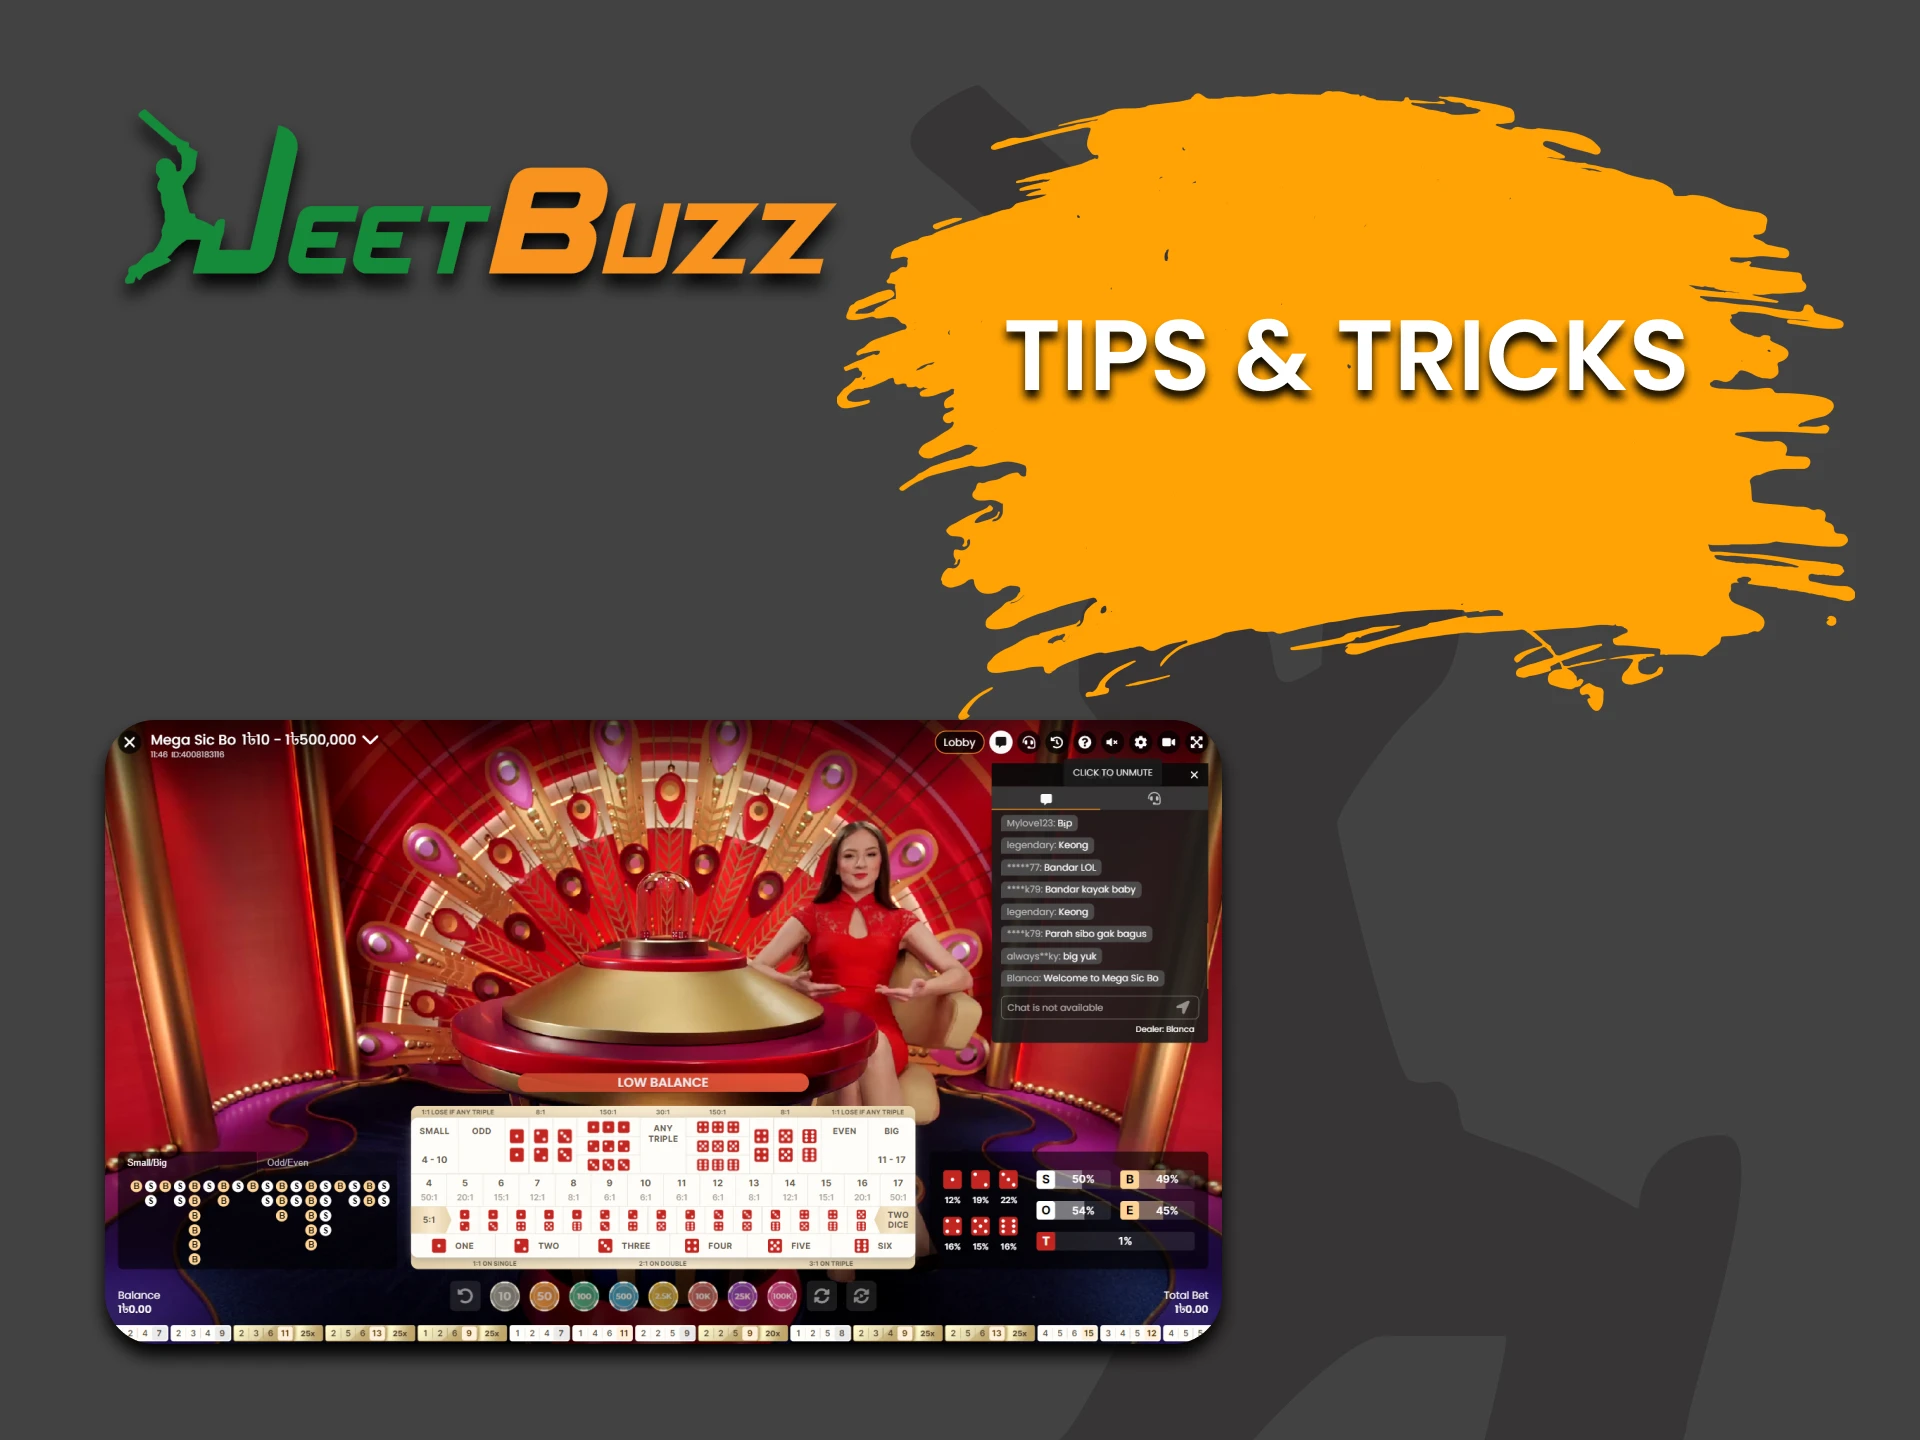 Get tips from other Sic Bo players on Jeetbuzz.